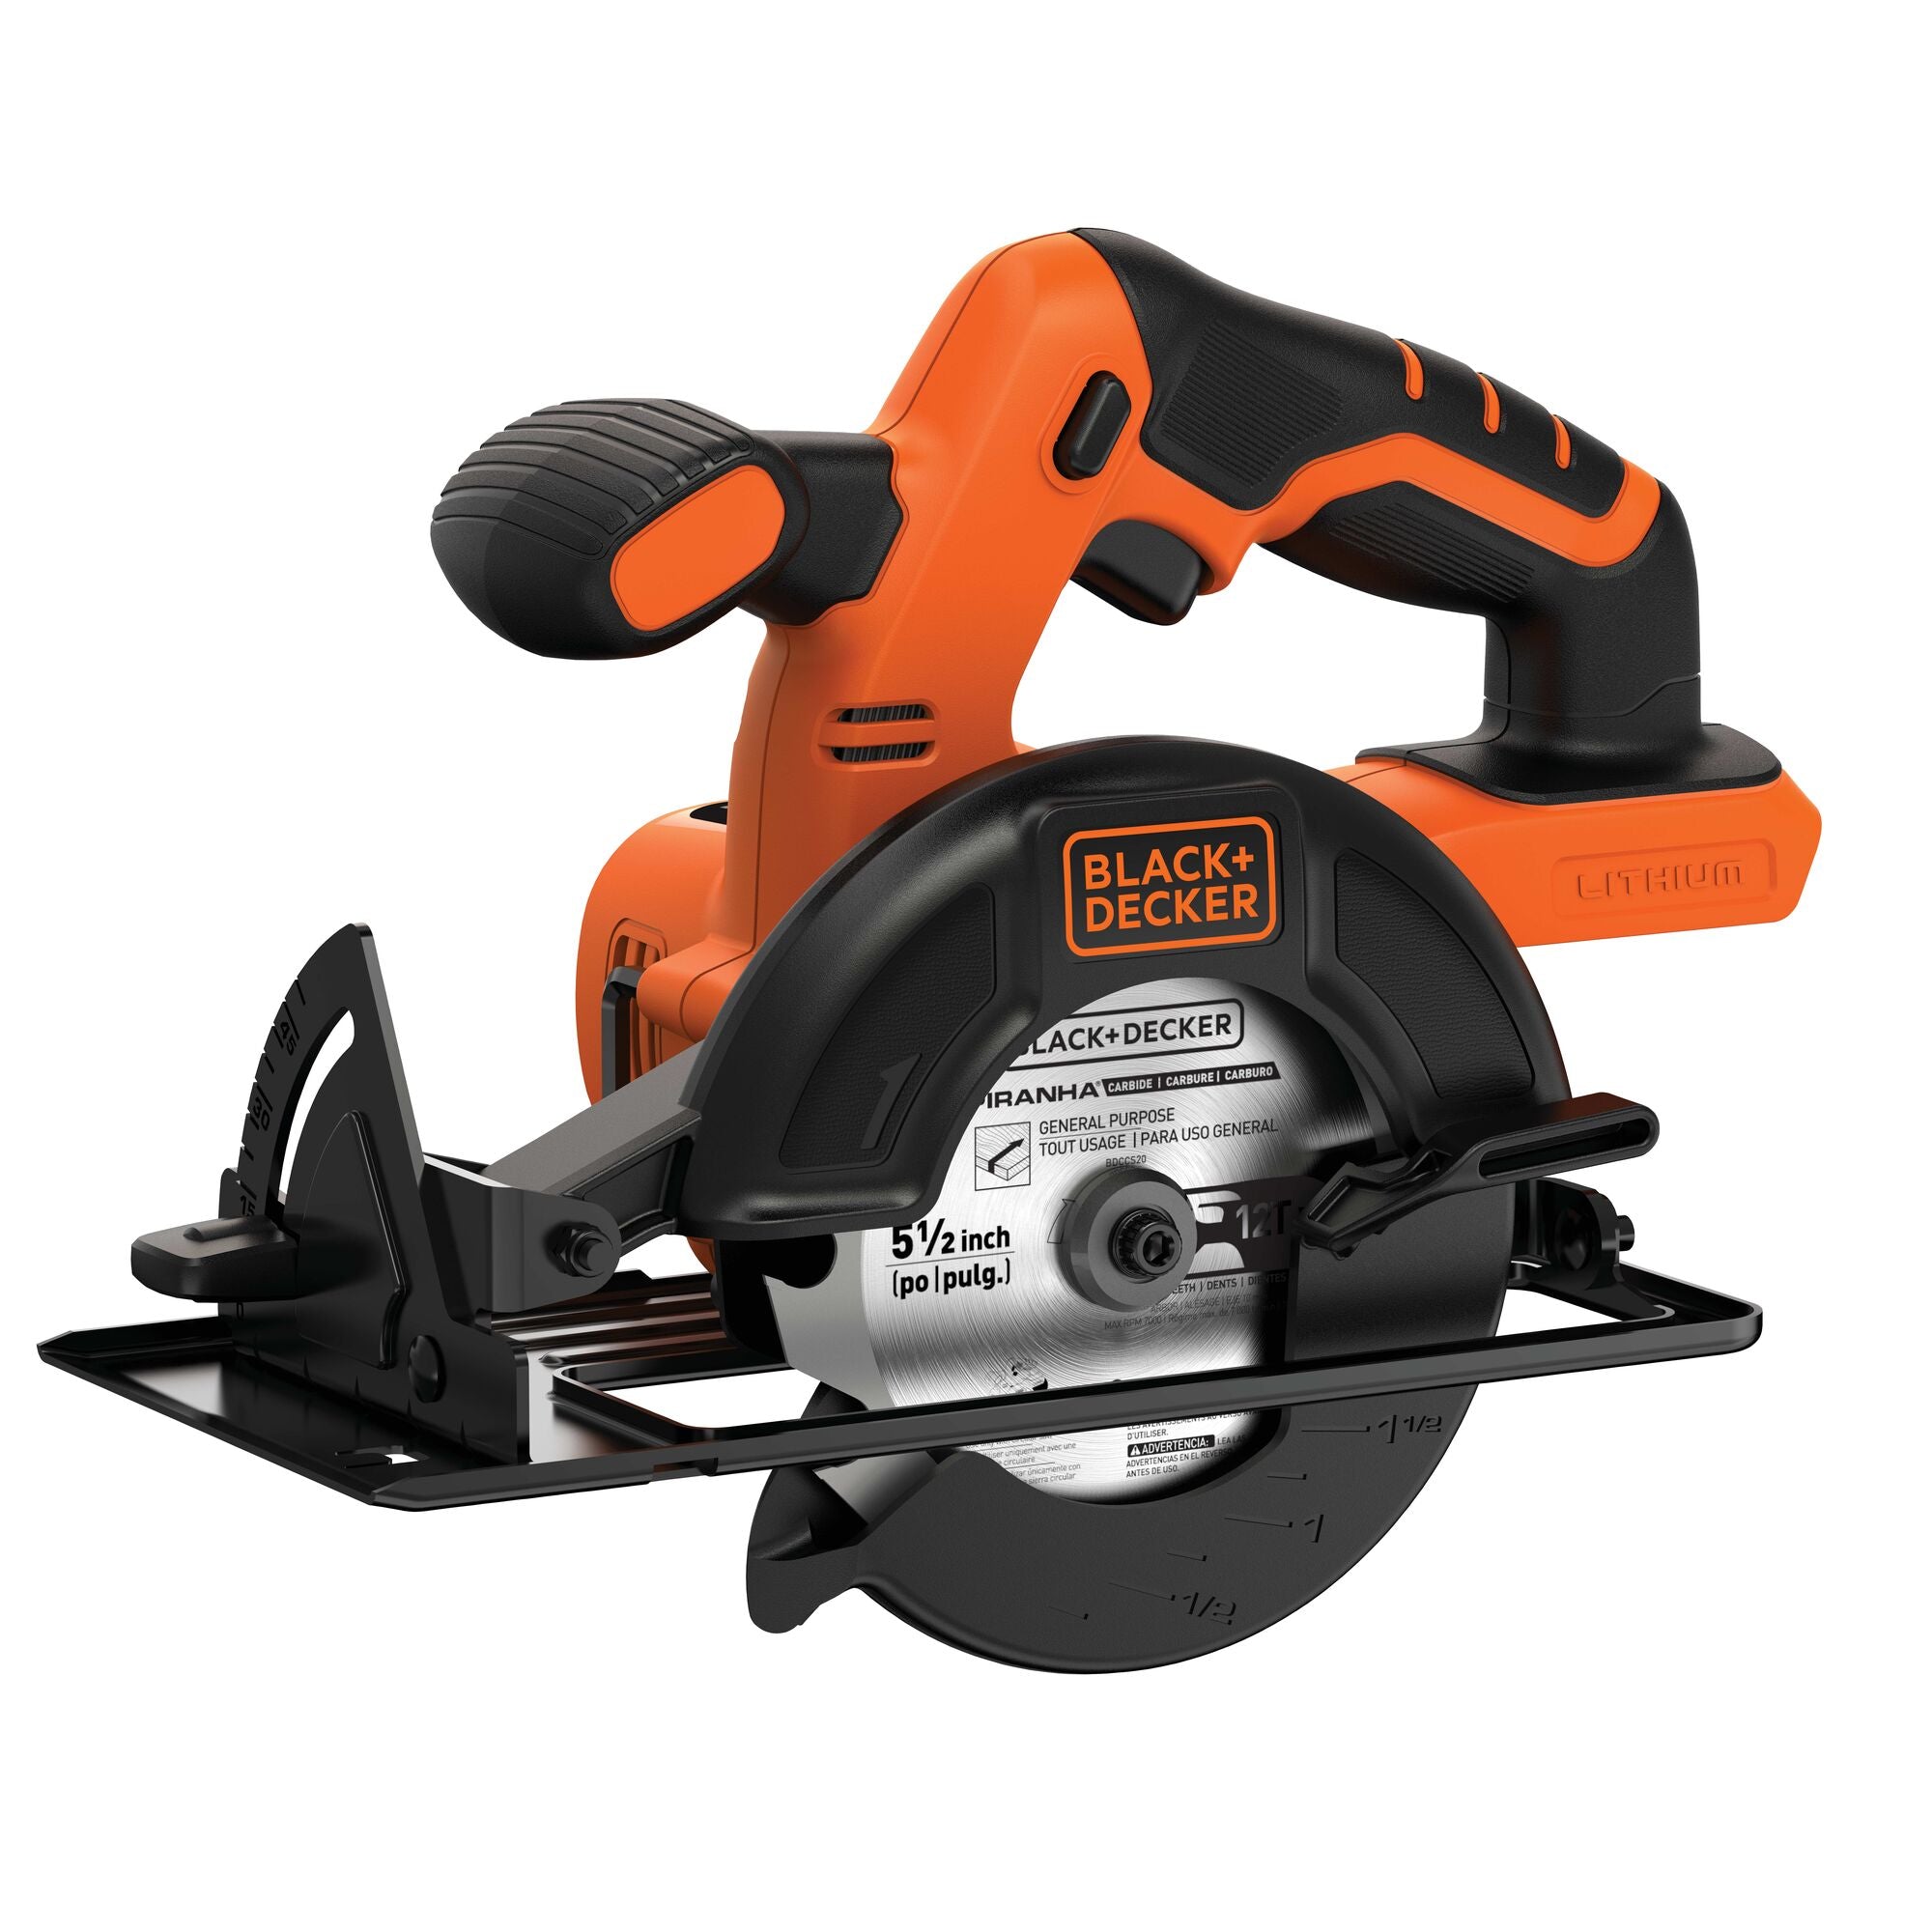 Black & Decker Powered Handsaw Product Review 